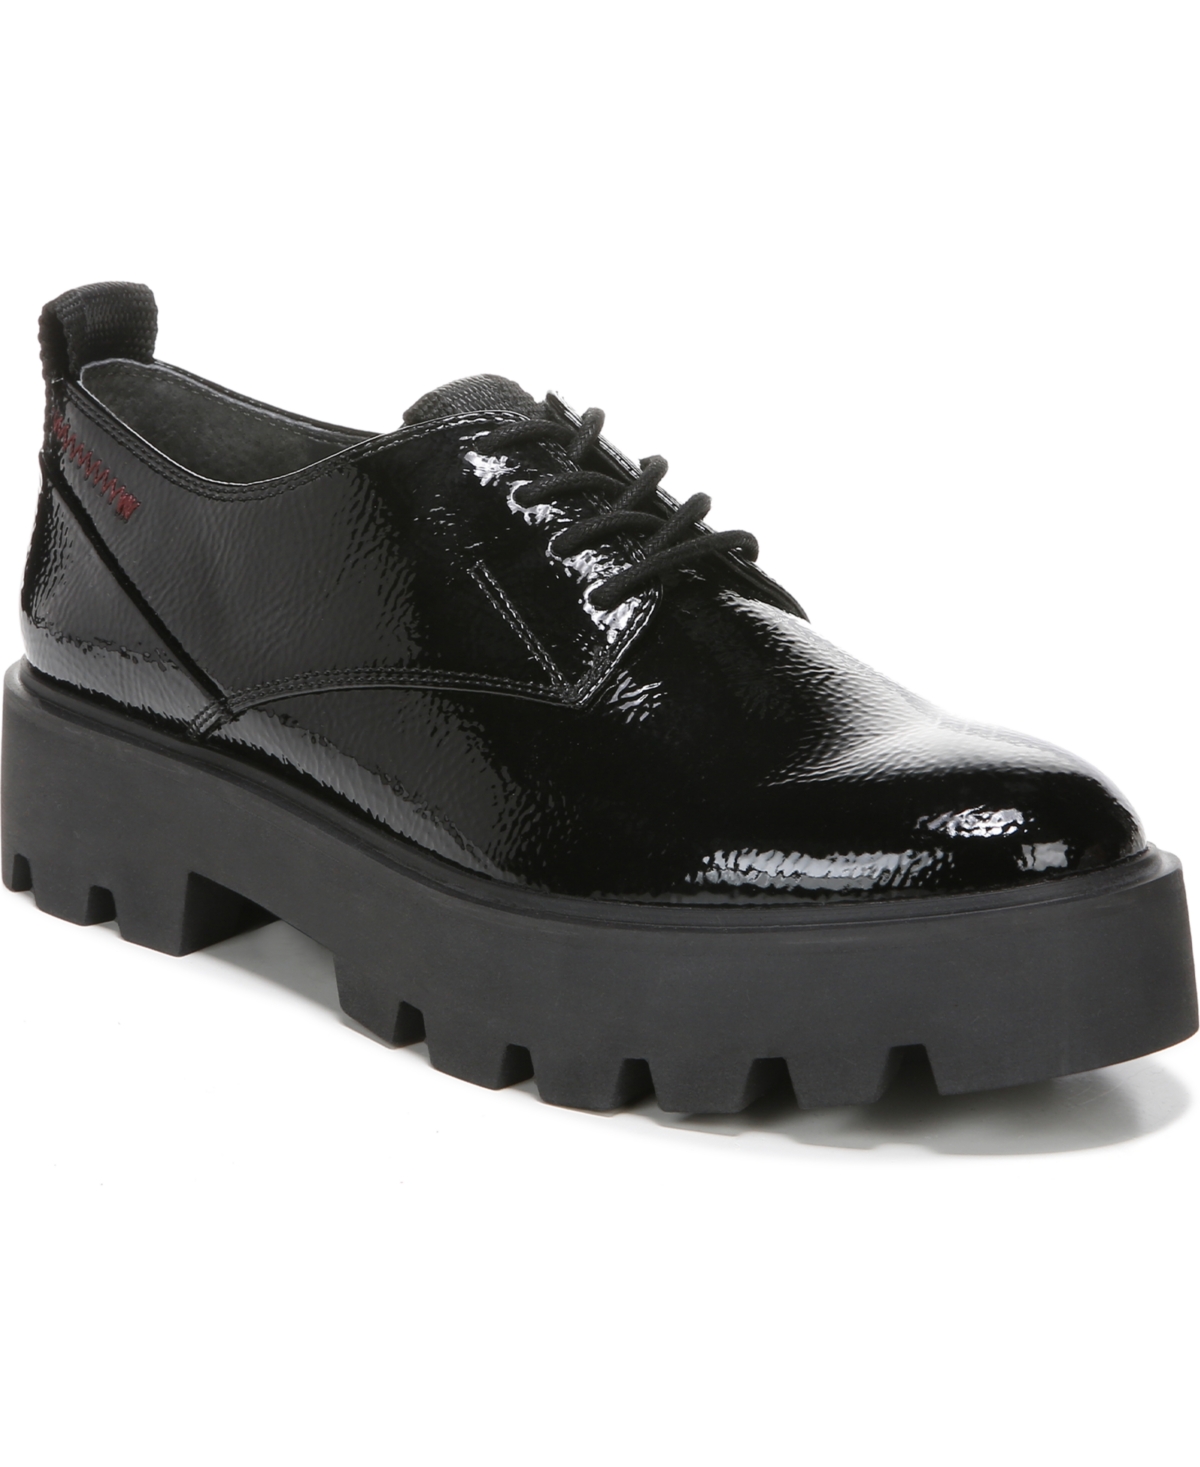 UPC 017138587396 product image for Franco Sarto Balin Laced Lug Sole Oxfords Women's Shoes | upcitemdb.com